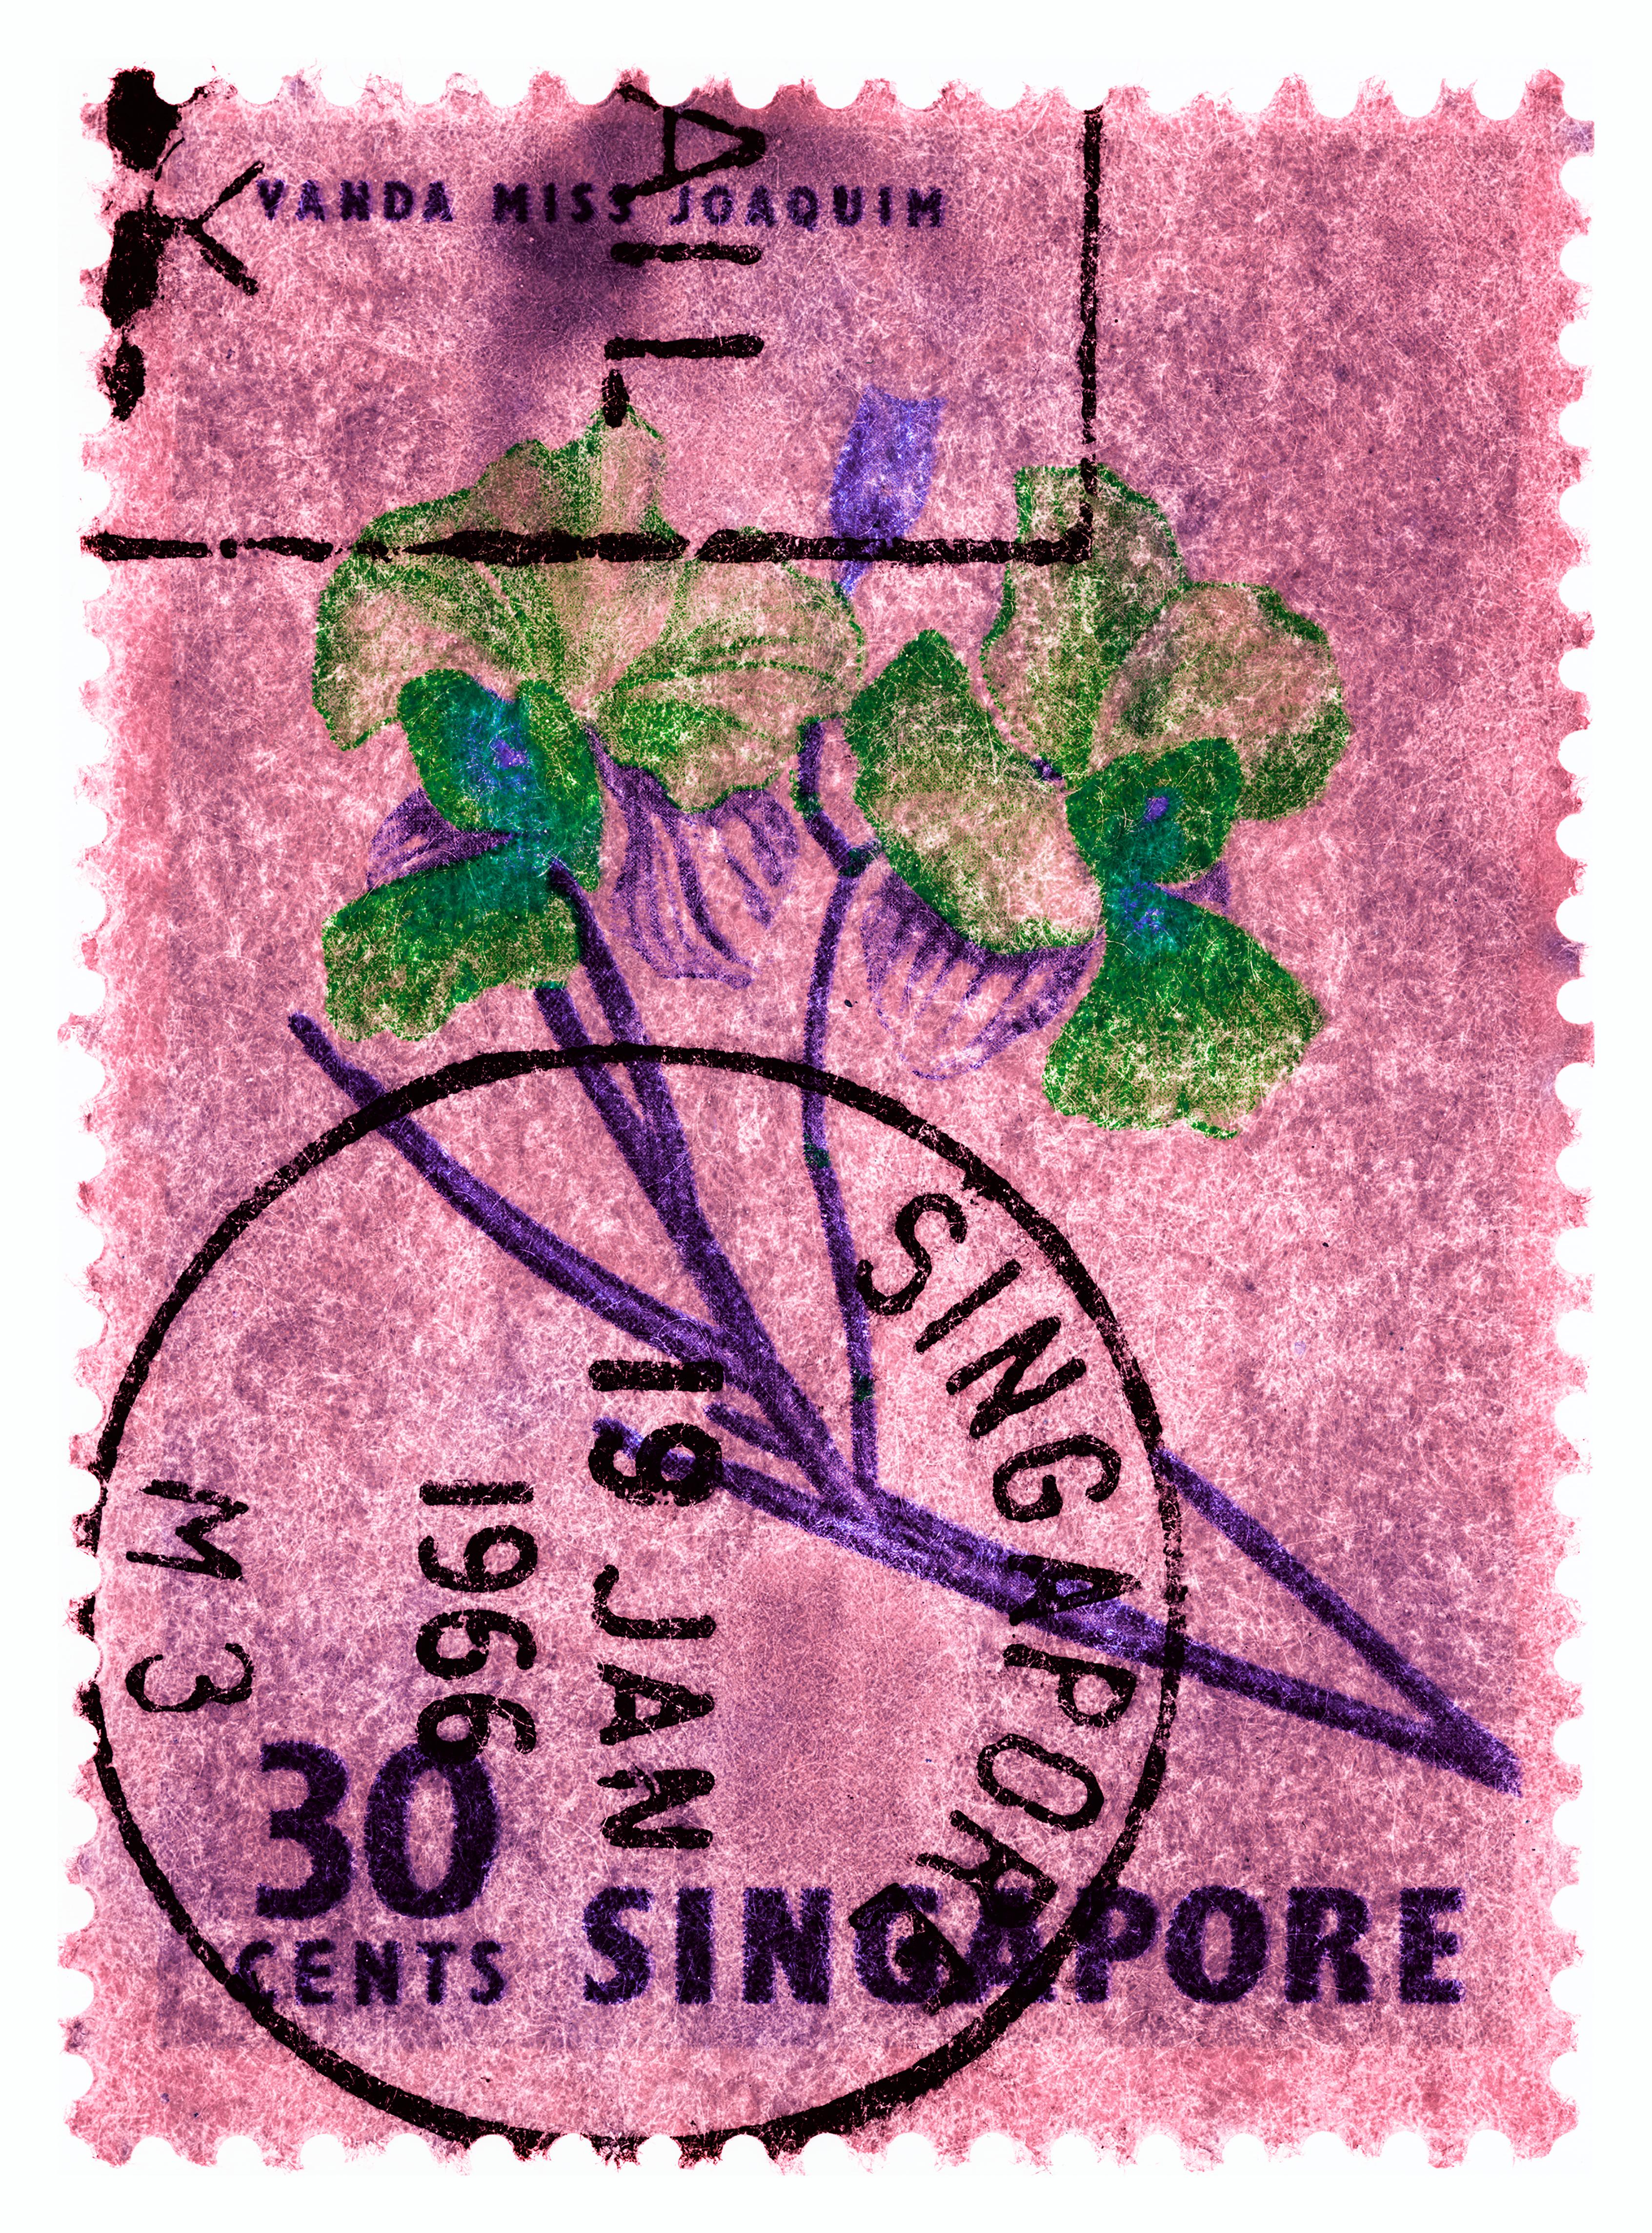 Heidler & Heeps Print - Singapore Stamp Collection, 30c Singapore Orchid Pink - Floral color photo